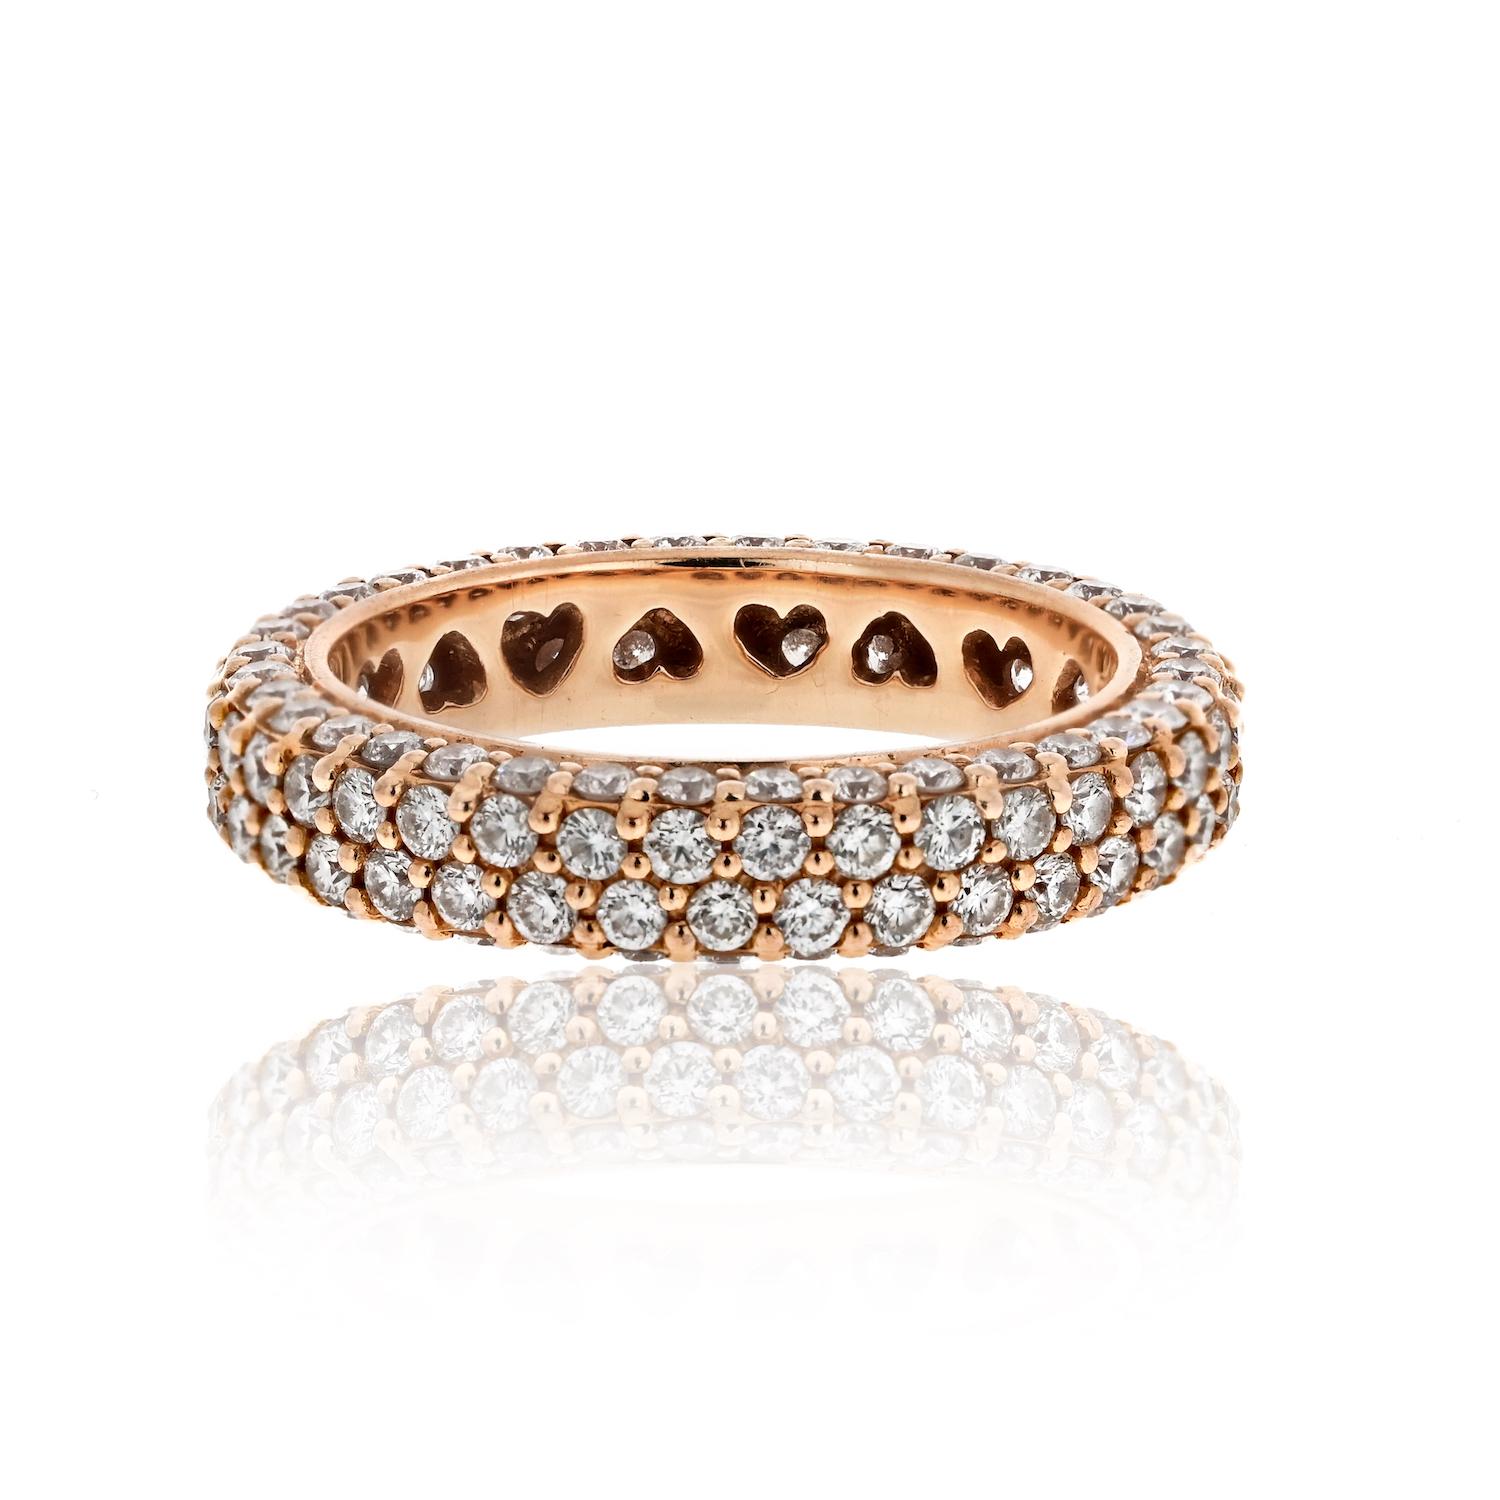 Indulge in the timeless elegance of our Diamond Eternity Band in 18k Rose Gold. This exquisite ring features four rows of round-cut diamonds, meticulously set to create a stunning display of brilliance. With a width of 4mm, it strikes the perfect